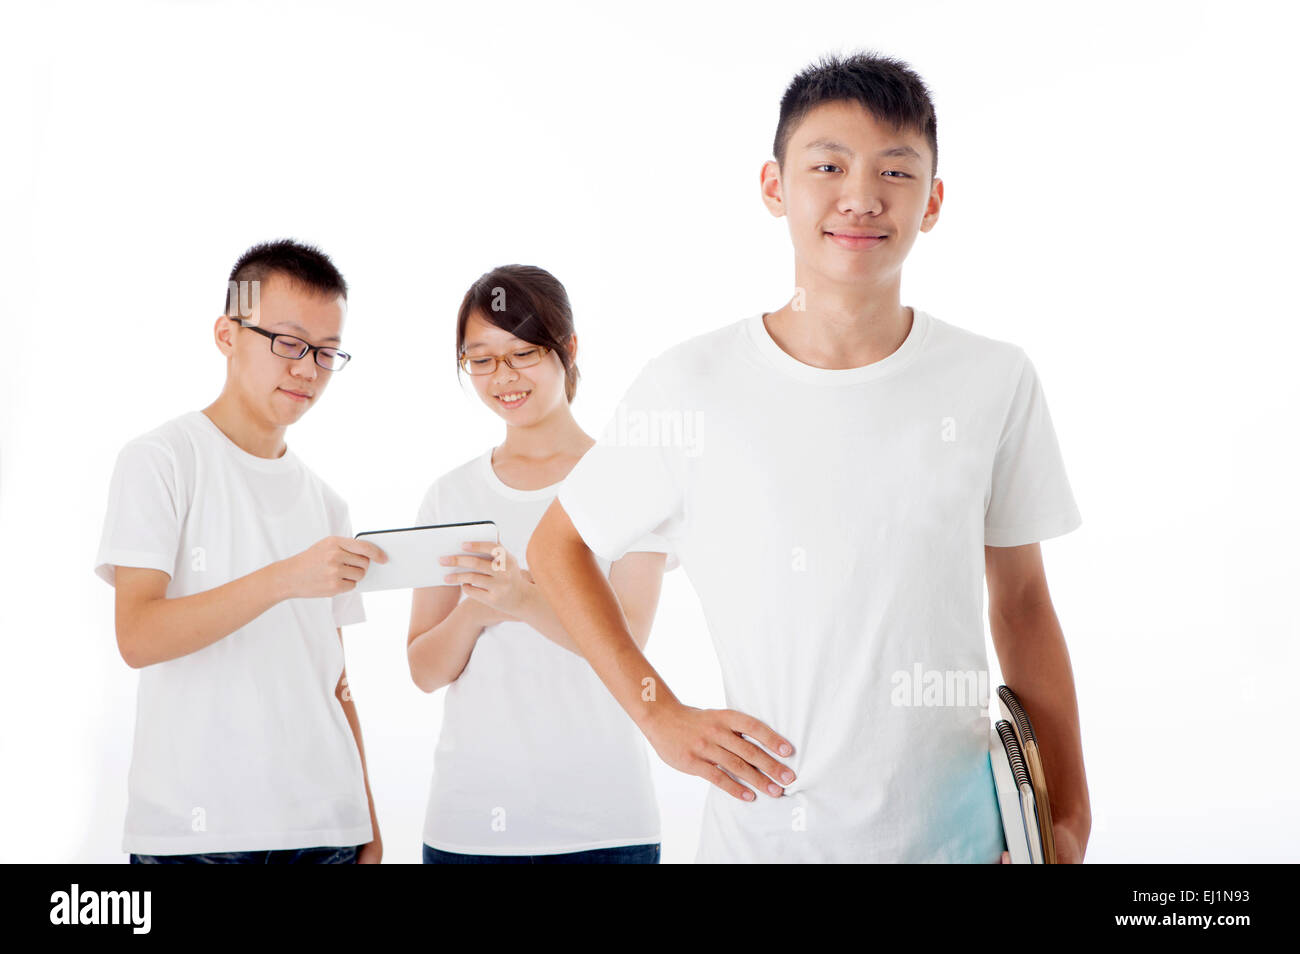 Teenager boy smiling at the camera with arms akimbo Stock Photo